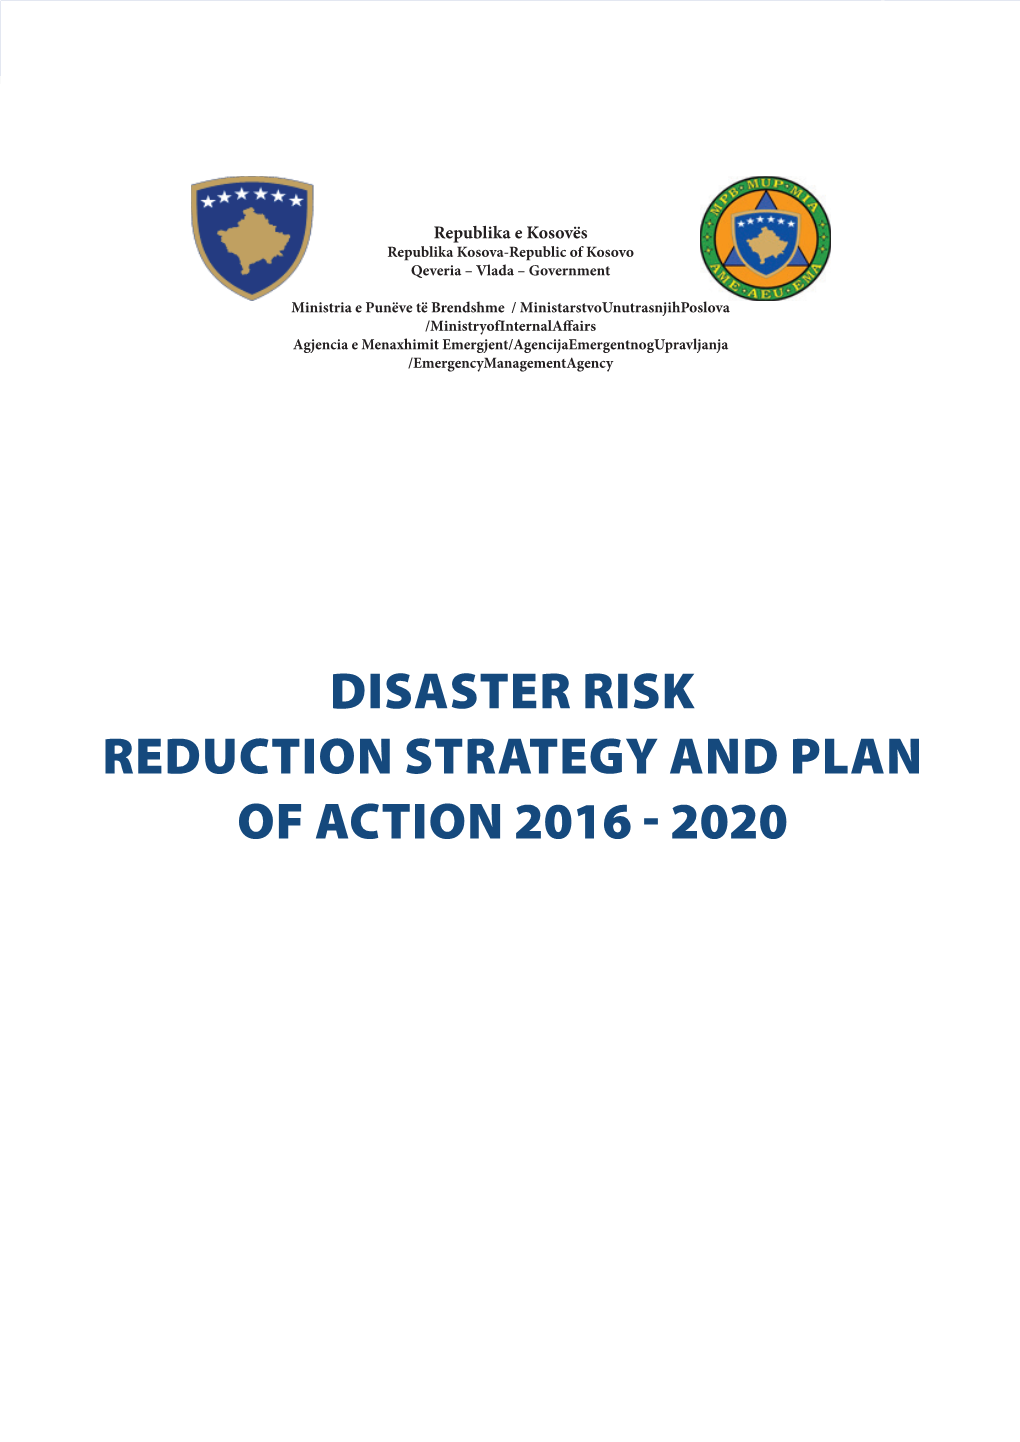 Disaster Risk Reduction Strategy and Plan of Action 2016 - 2020 1